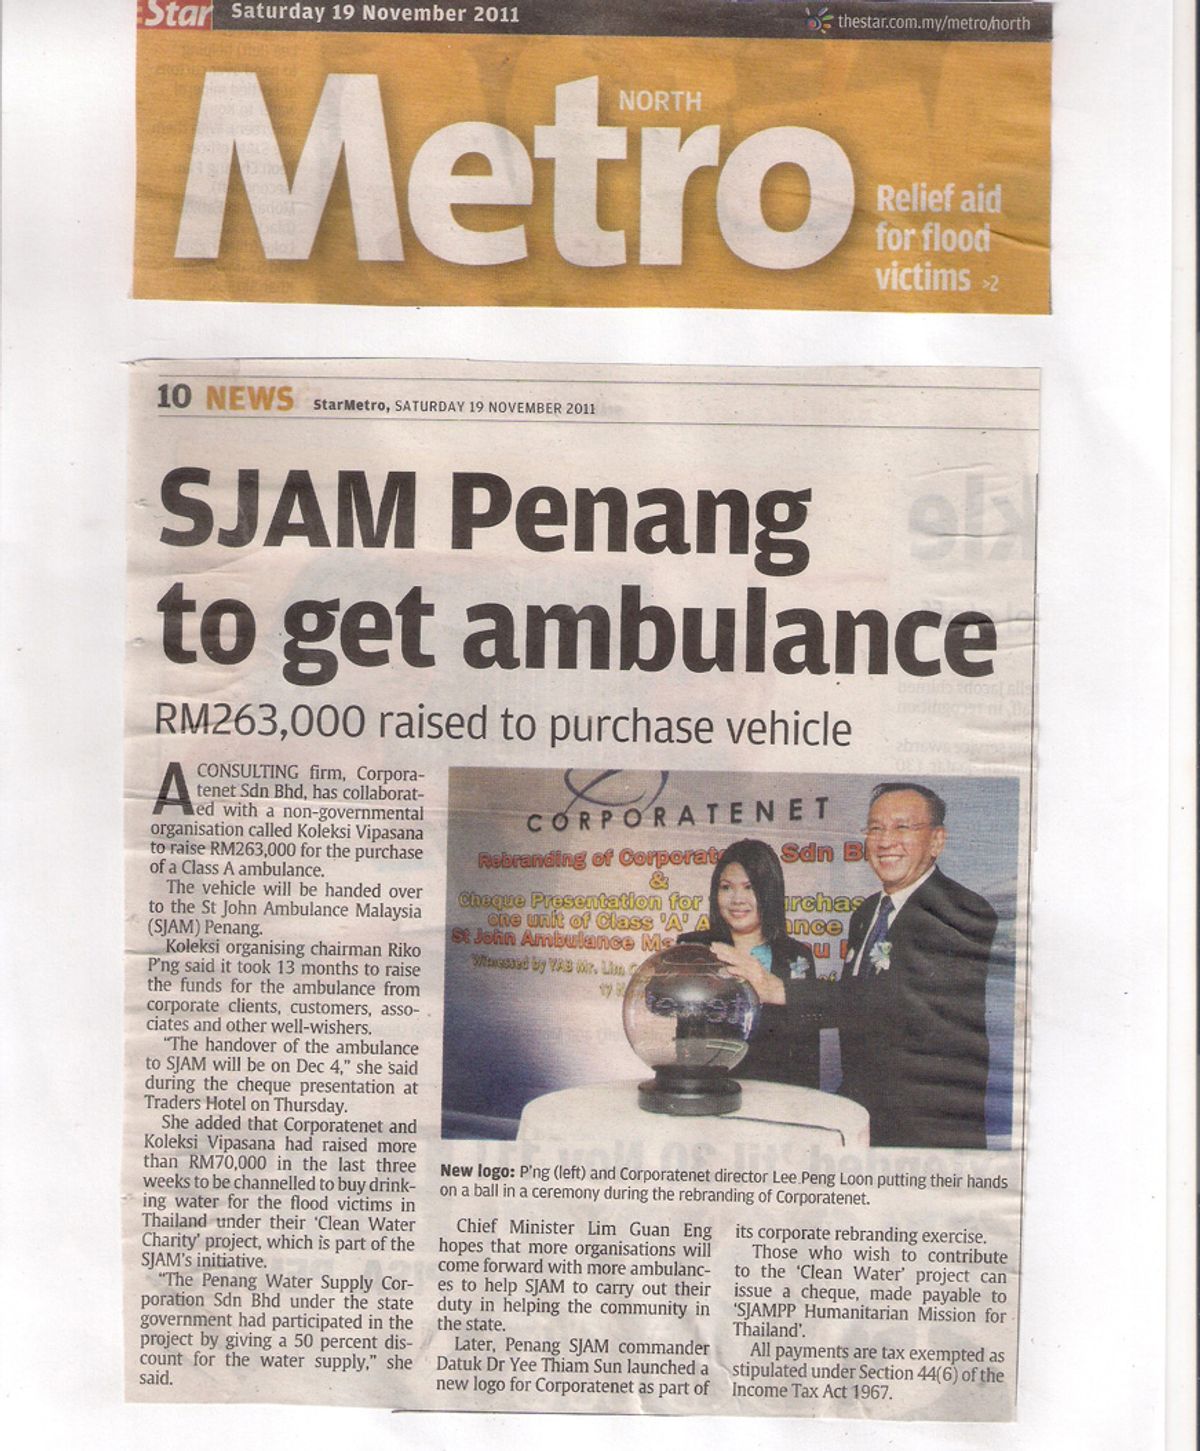 SJAM Penang~to get rm263,000.00 to purchased ambulance